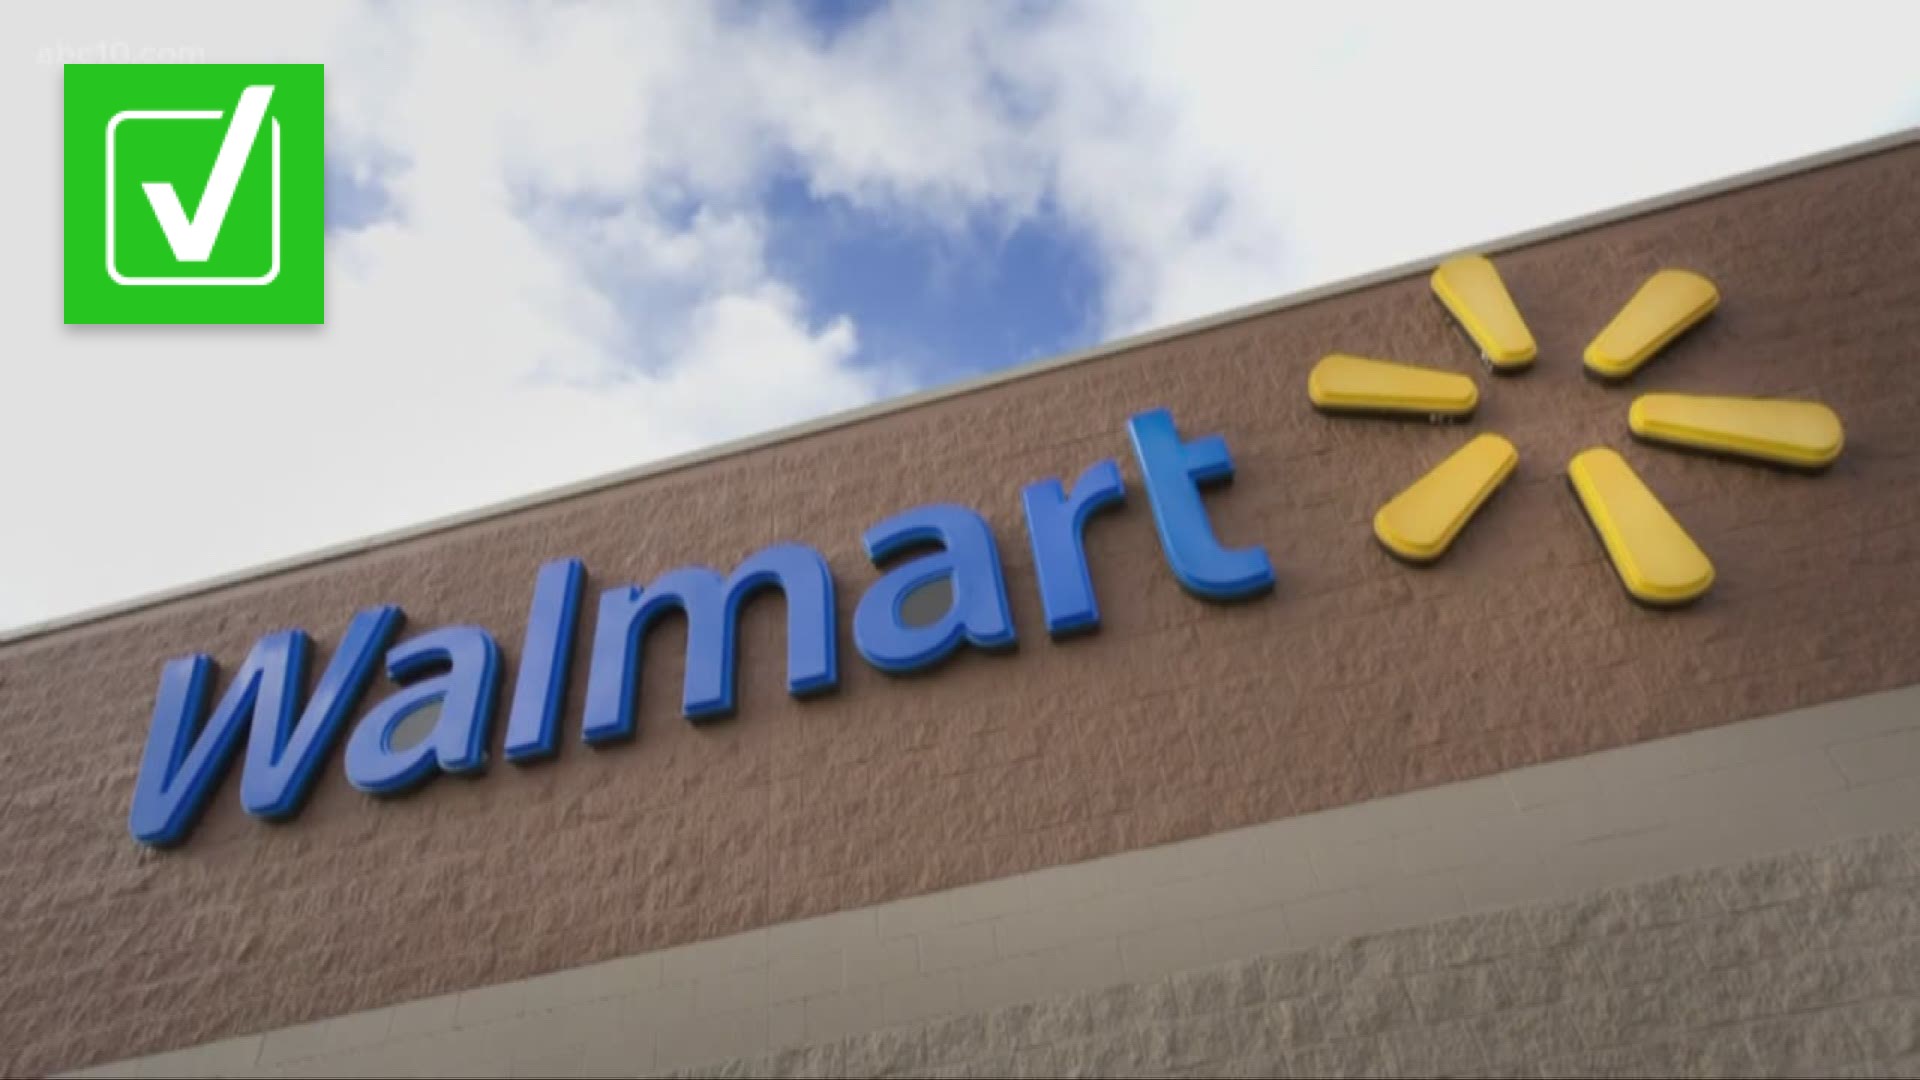 Starting in April, Walmart customers in Washington will no longer have the option to purchase plastic bags at checkout.